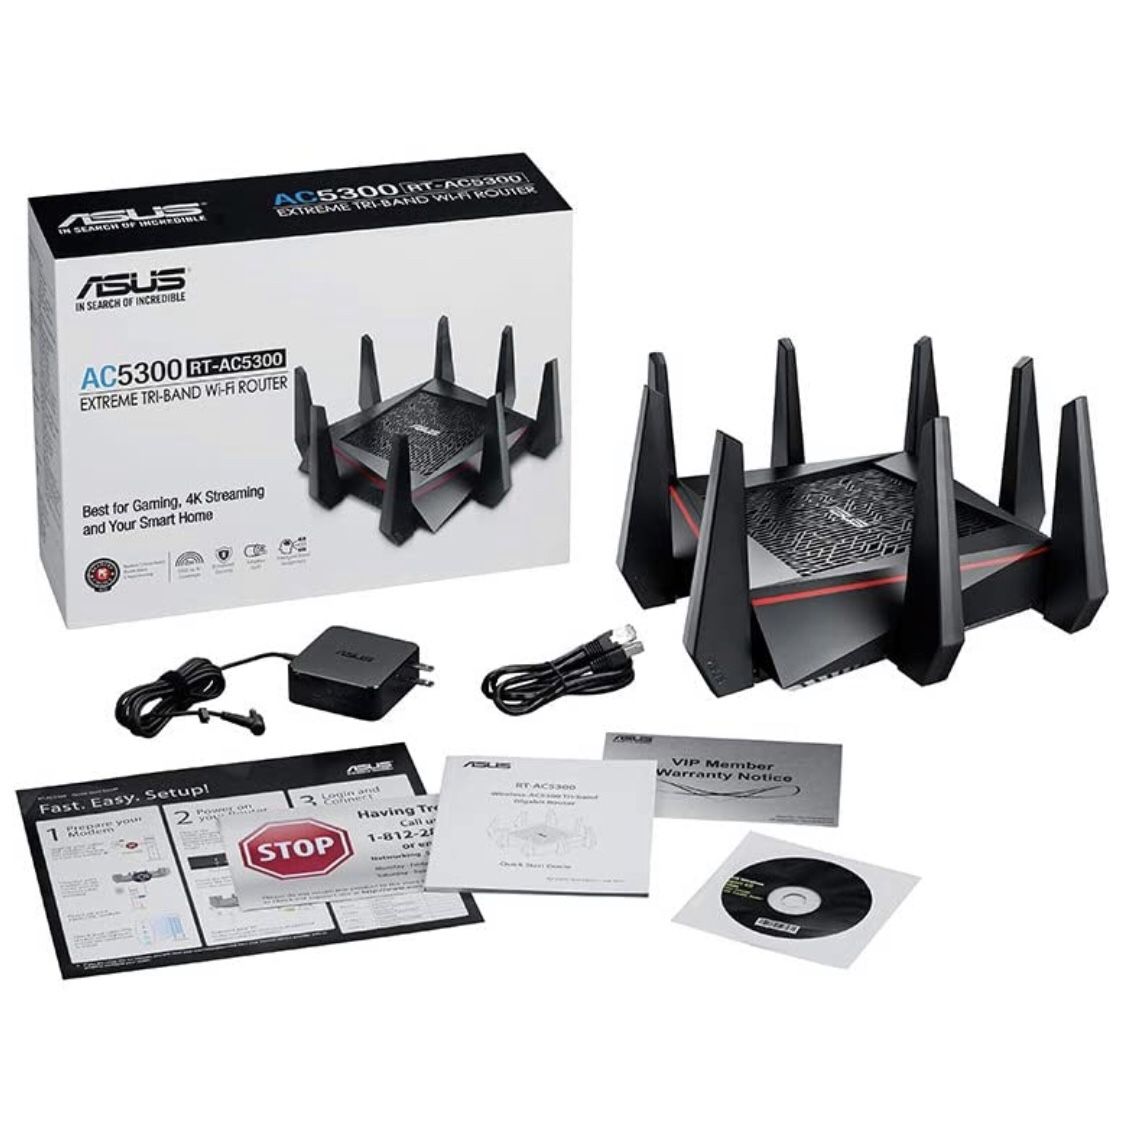 ASUS RT-AC5300 AC5300 Tri-band WiFi Gaming Router